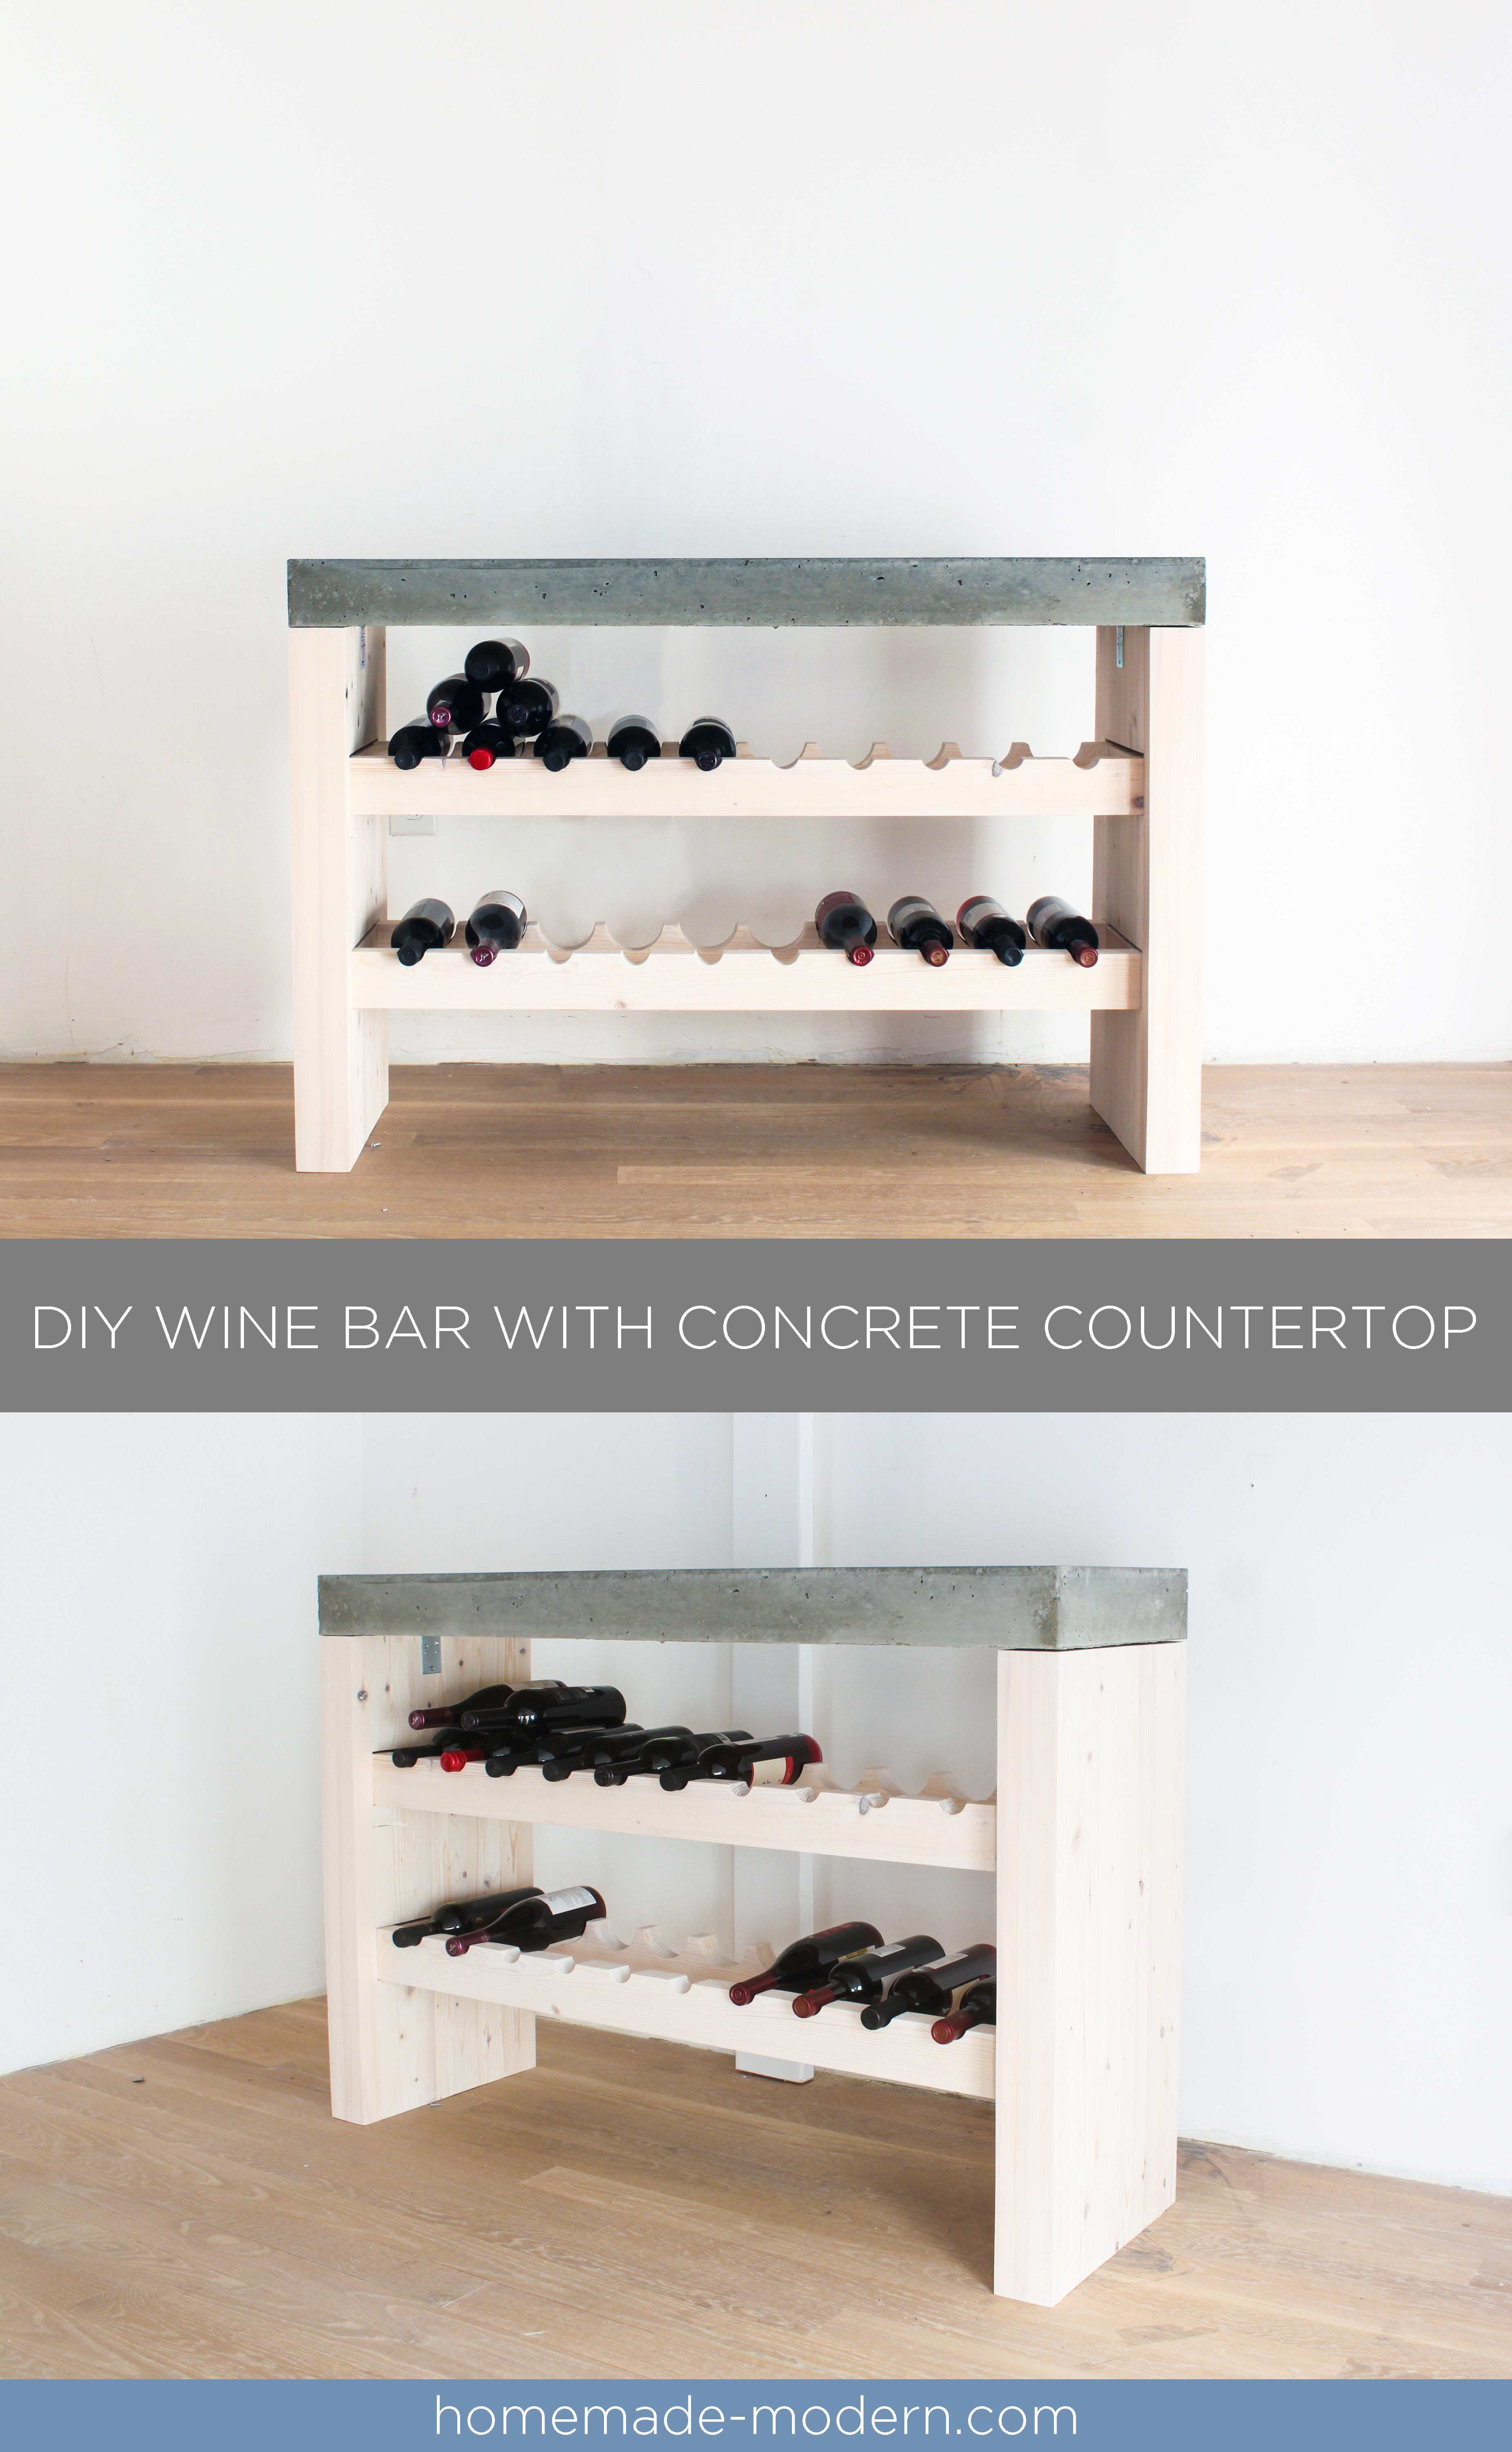 This DIY Wine Bar is made out of 2x4s and Quikrete 5000 concrete mix from Home Depot. Full instructions can be found at HomeMade-Modern.com